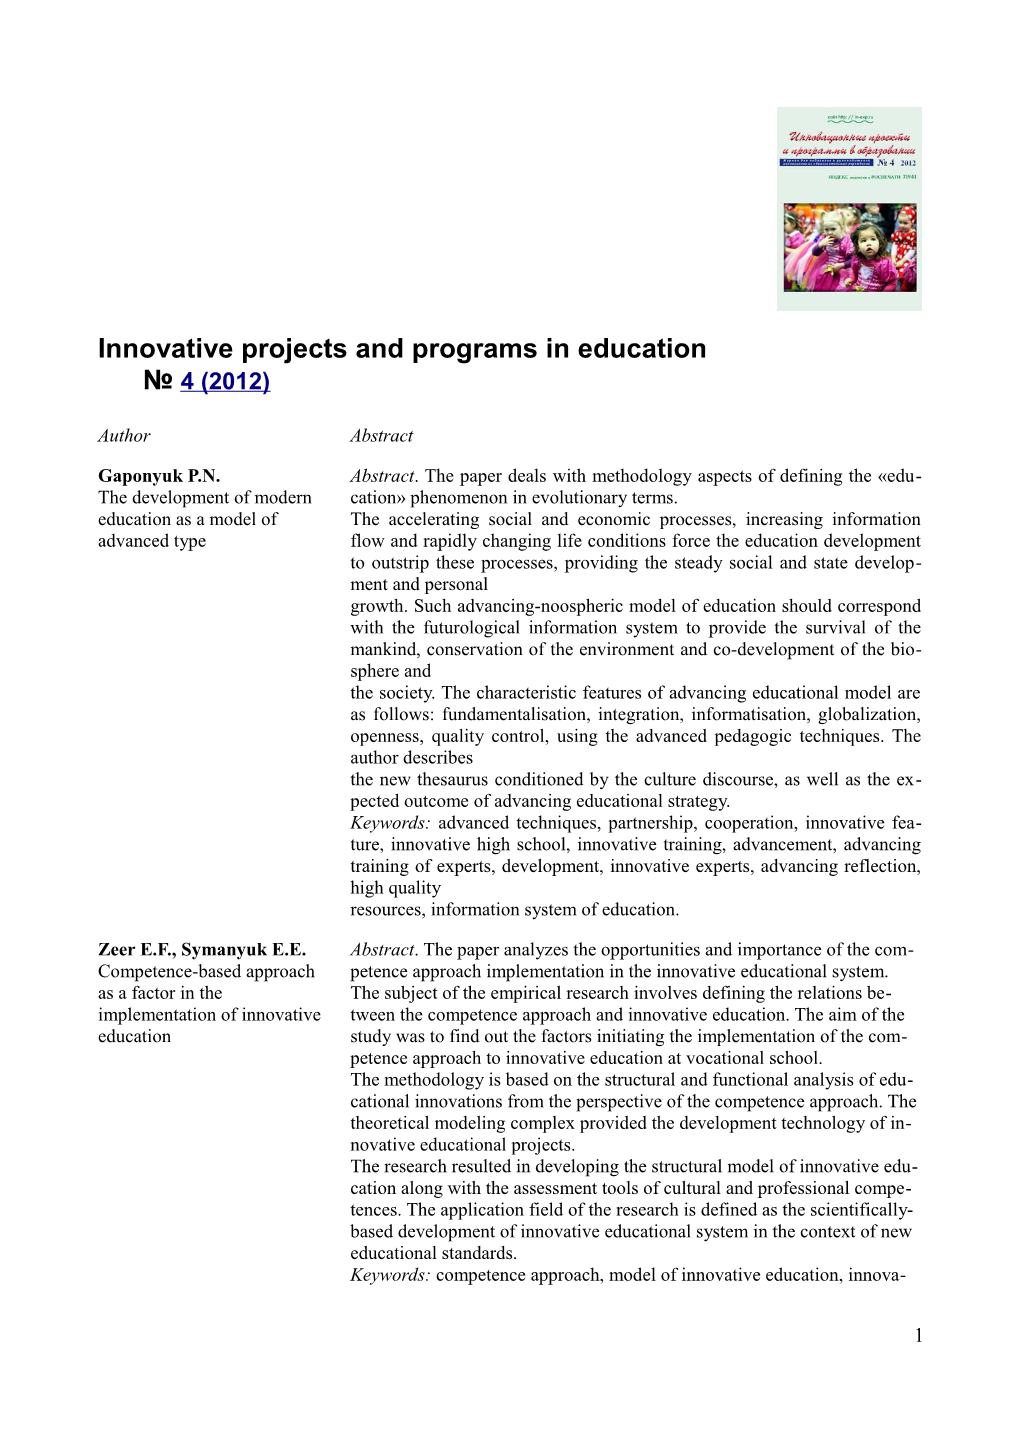 Innovative Projects and Programs in Education 4 (2012)